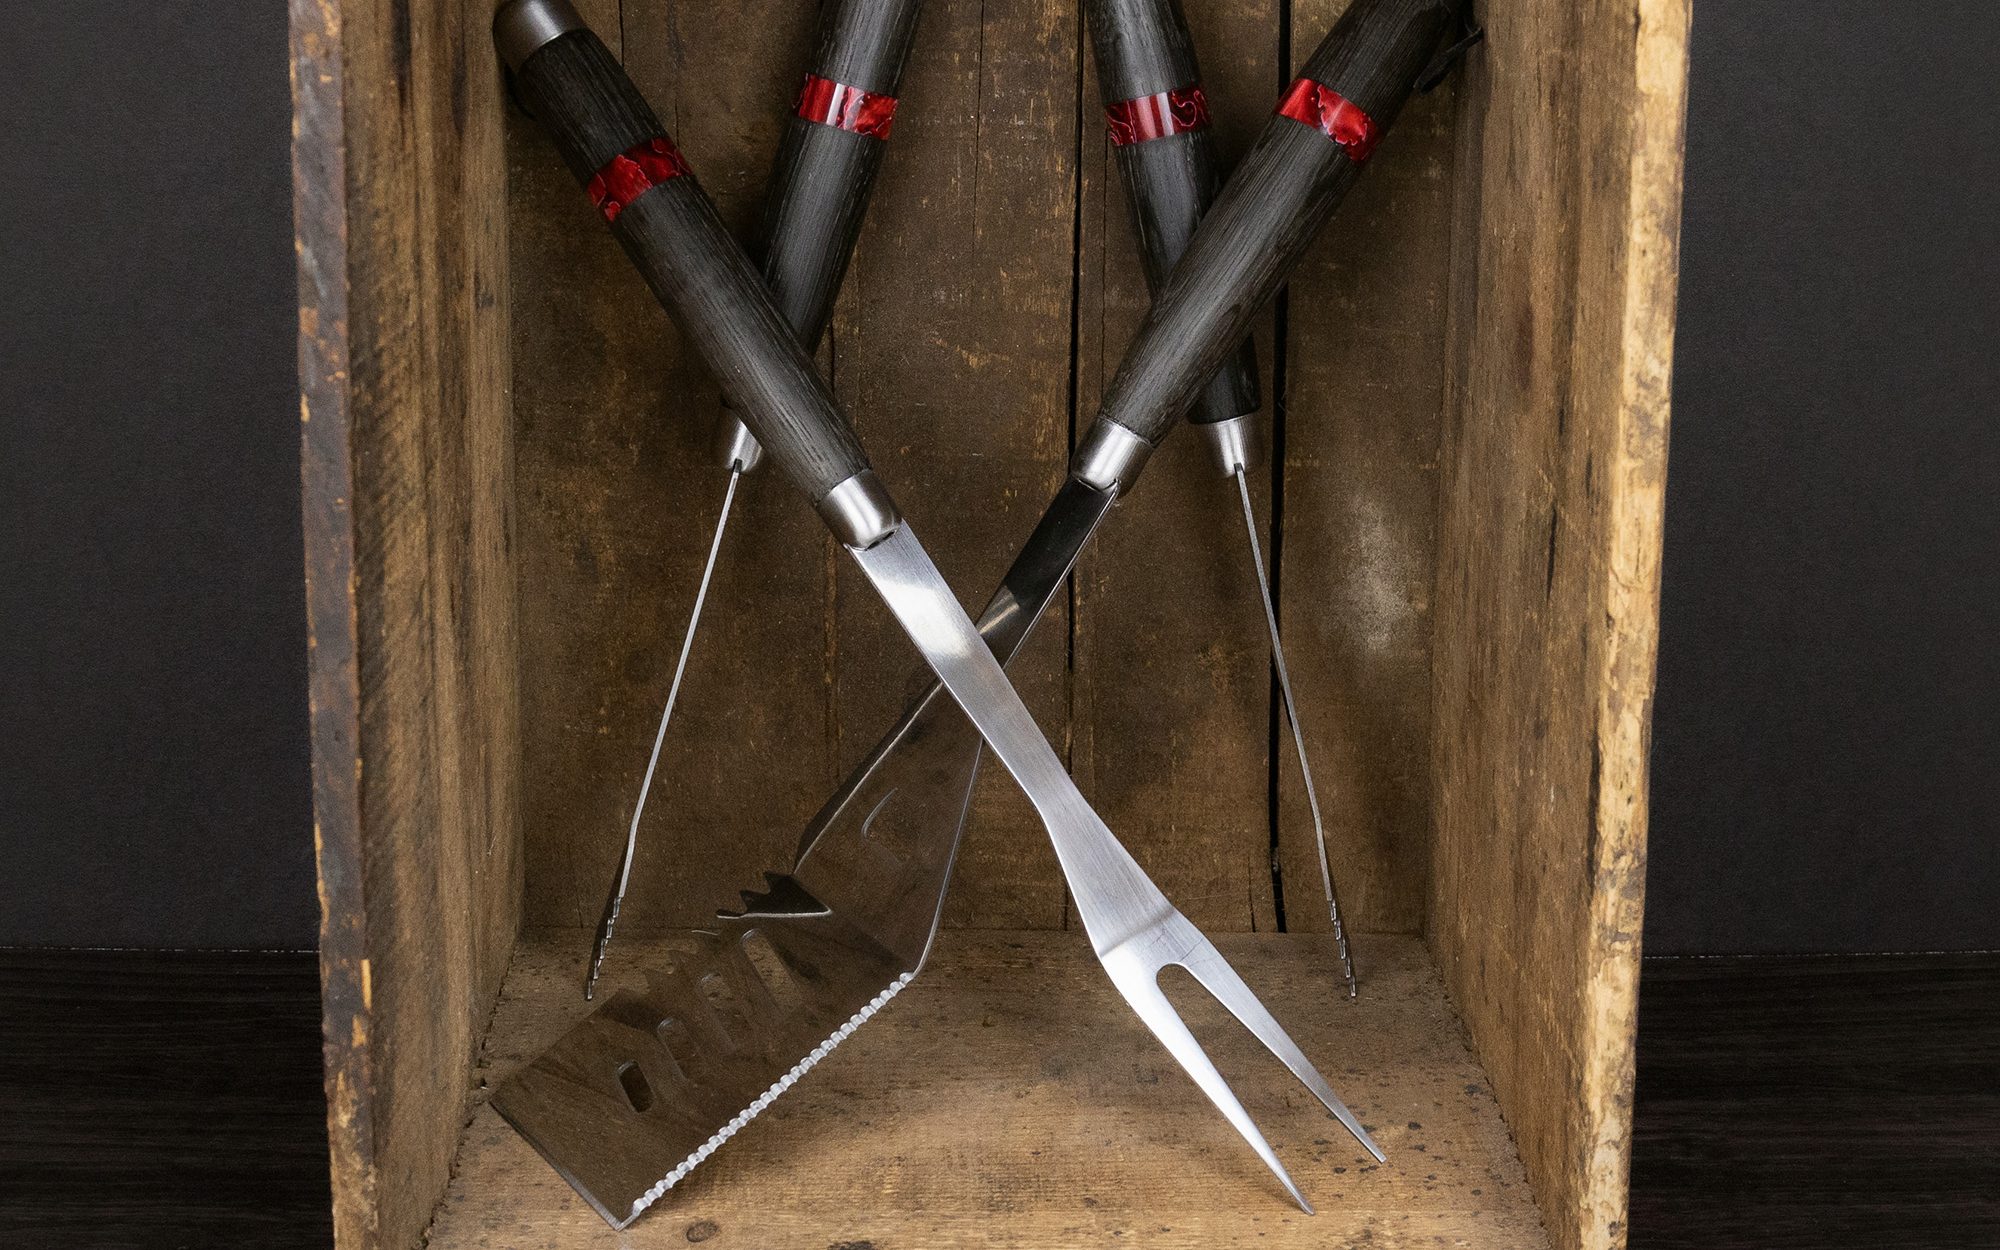 Barbecue Tool Set including Fork, Tongs and Spatula made with ancient bog oak spindle blank and jumbo red ribbon acrylic acetate project block from William Wood-Write Ltd.